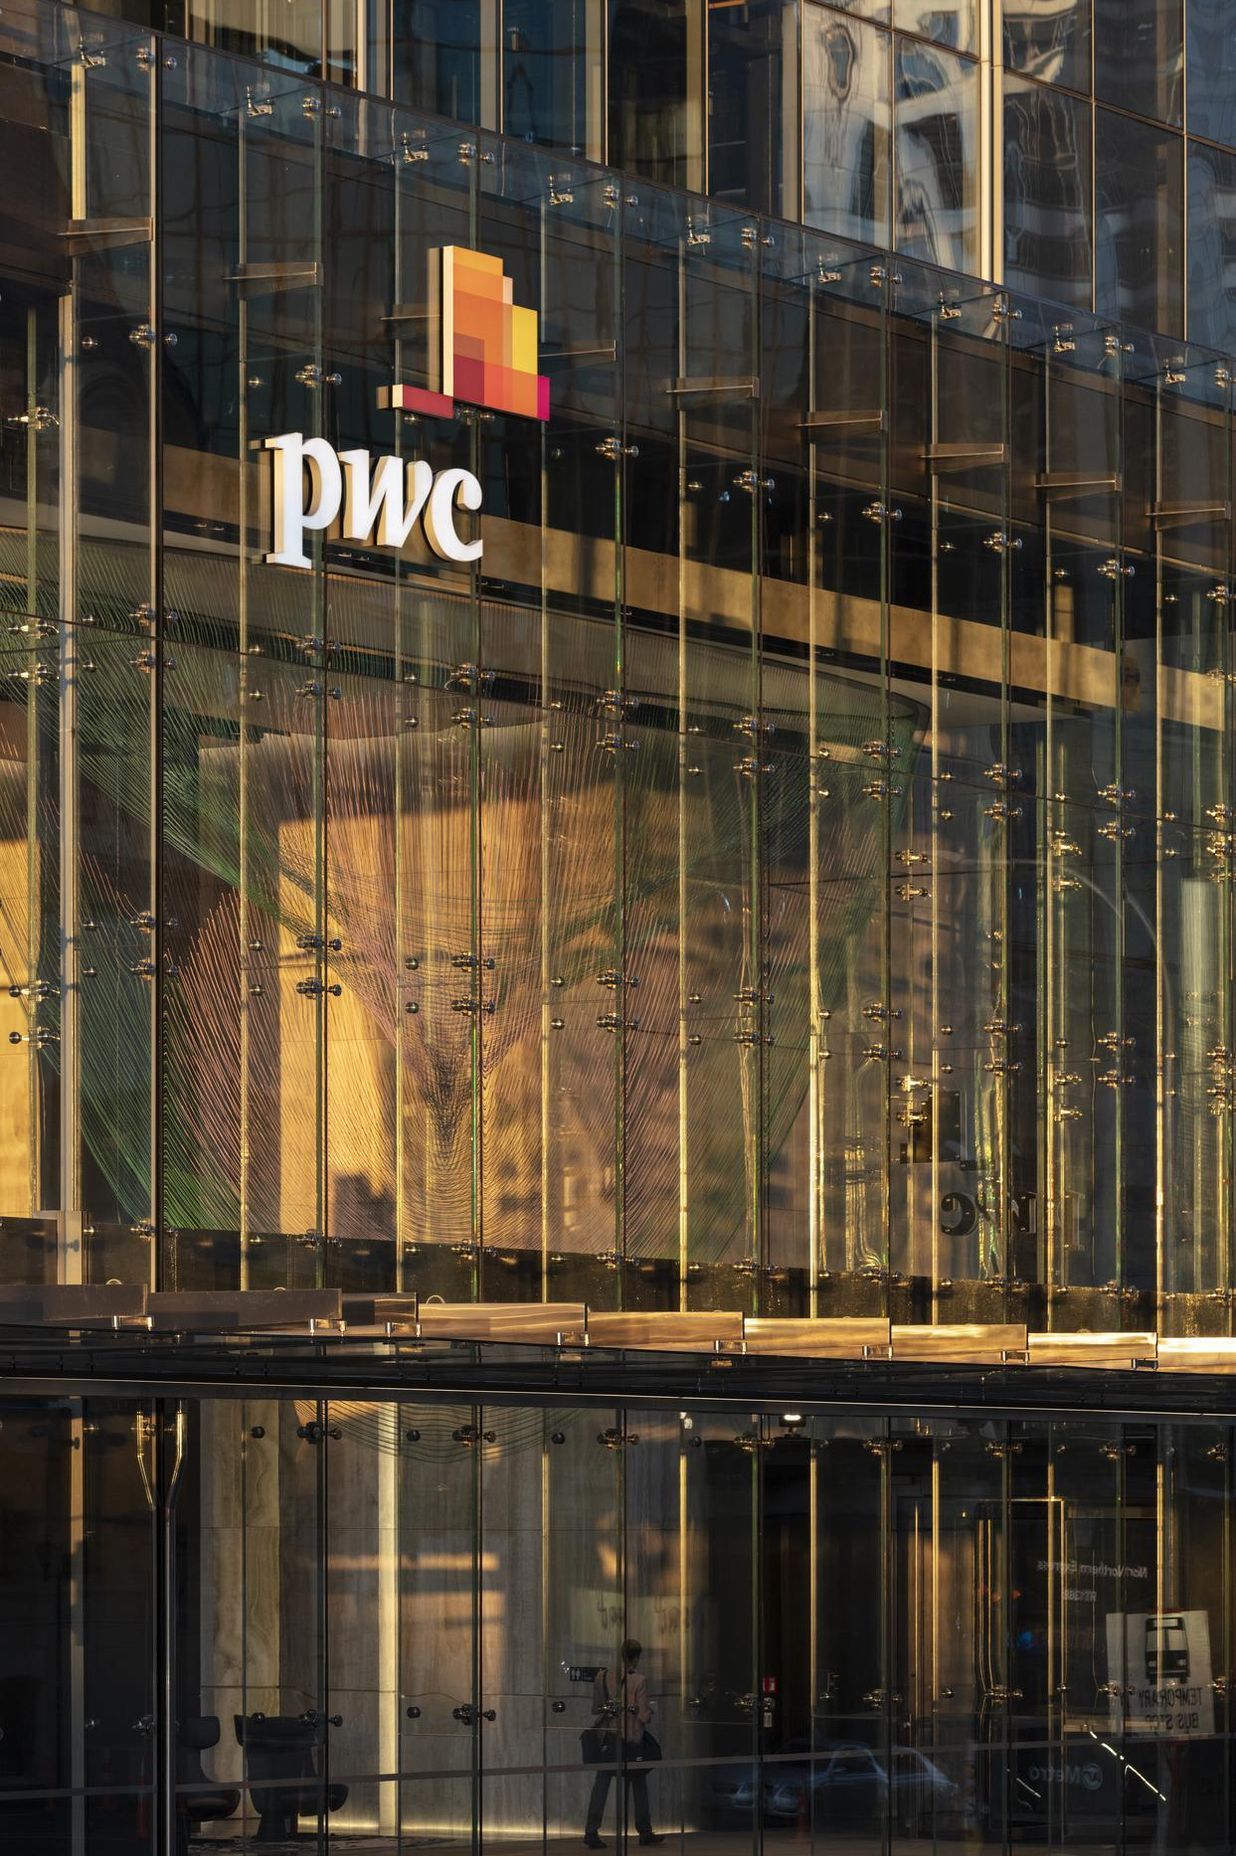 PwC Tower, Commercial Bay